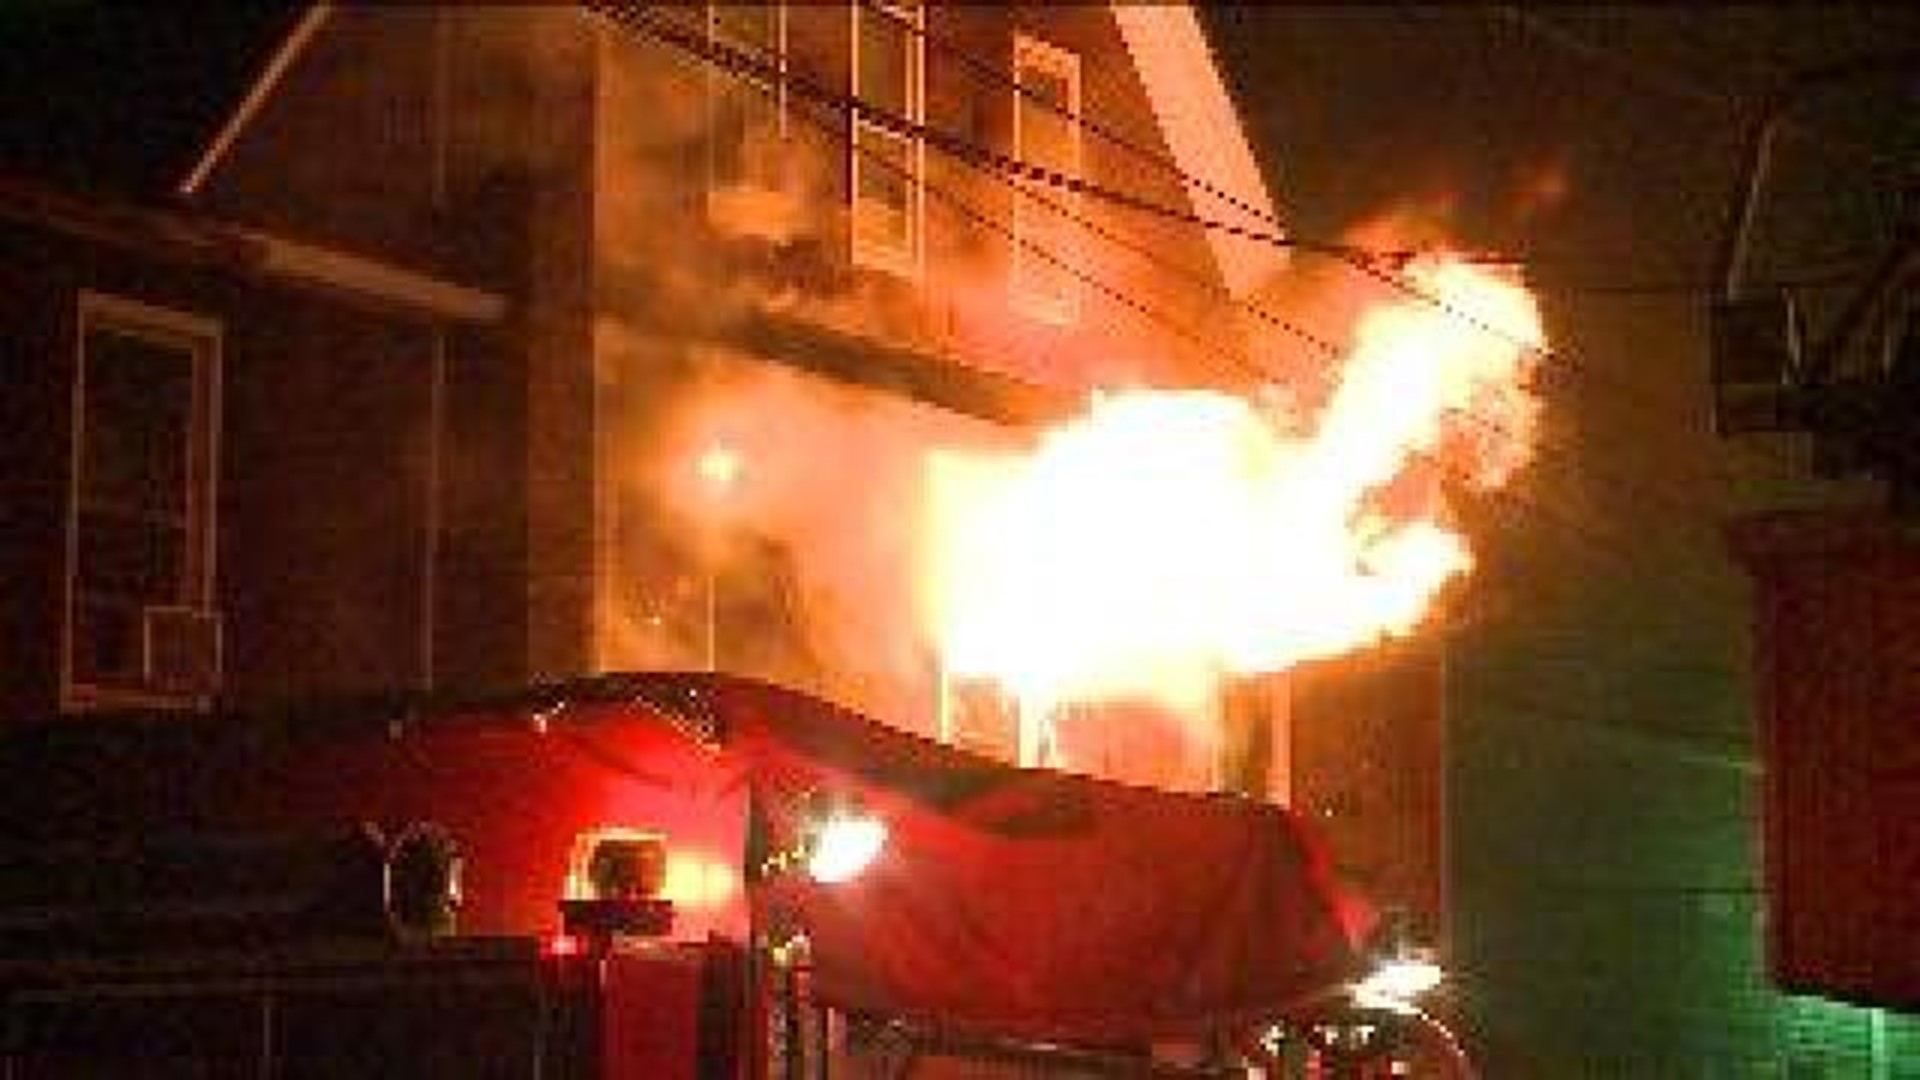 State Police: Burned Apartment House Had No Working Smoke Alarms